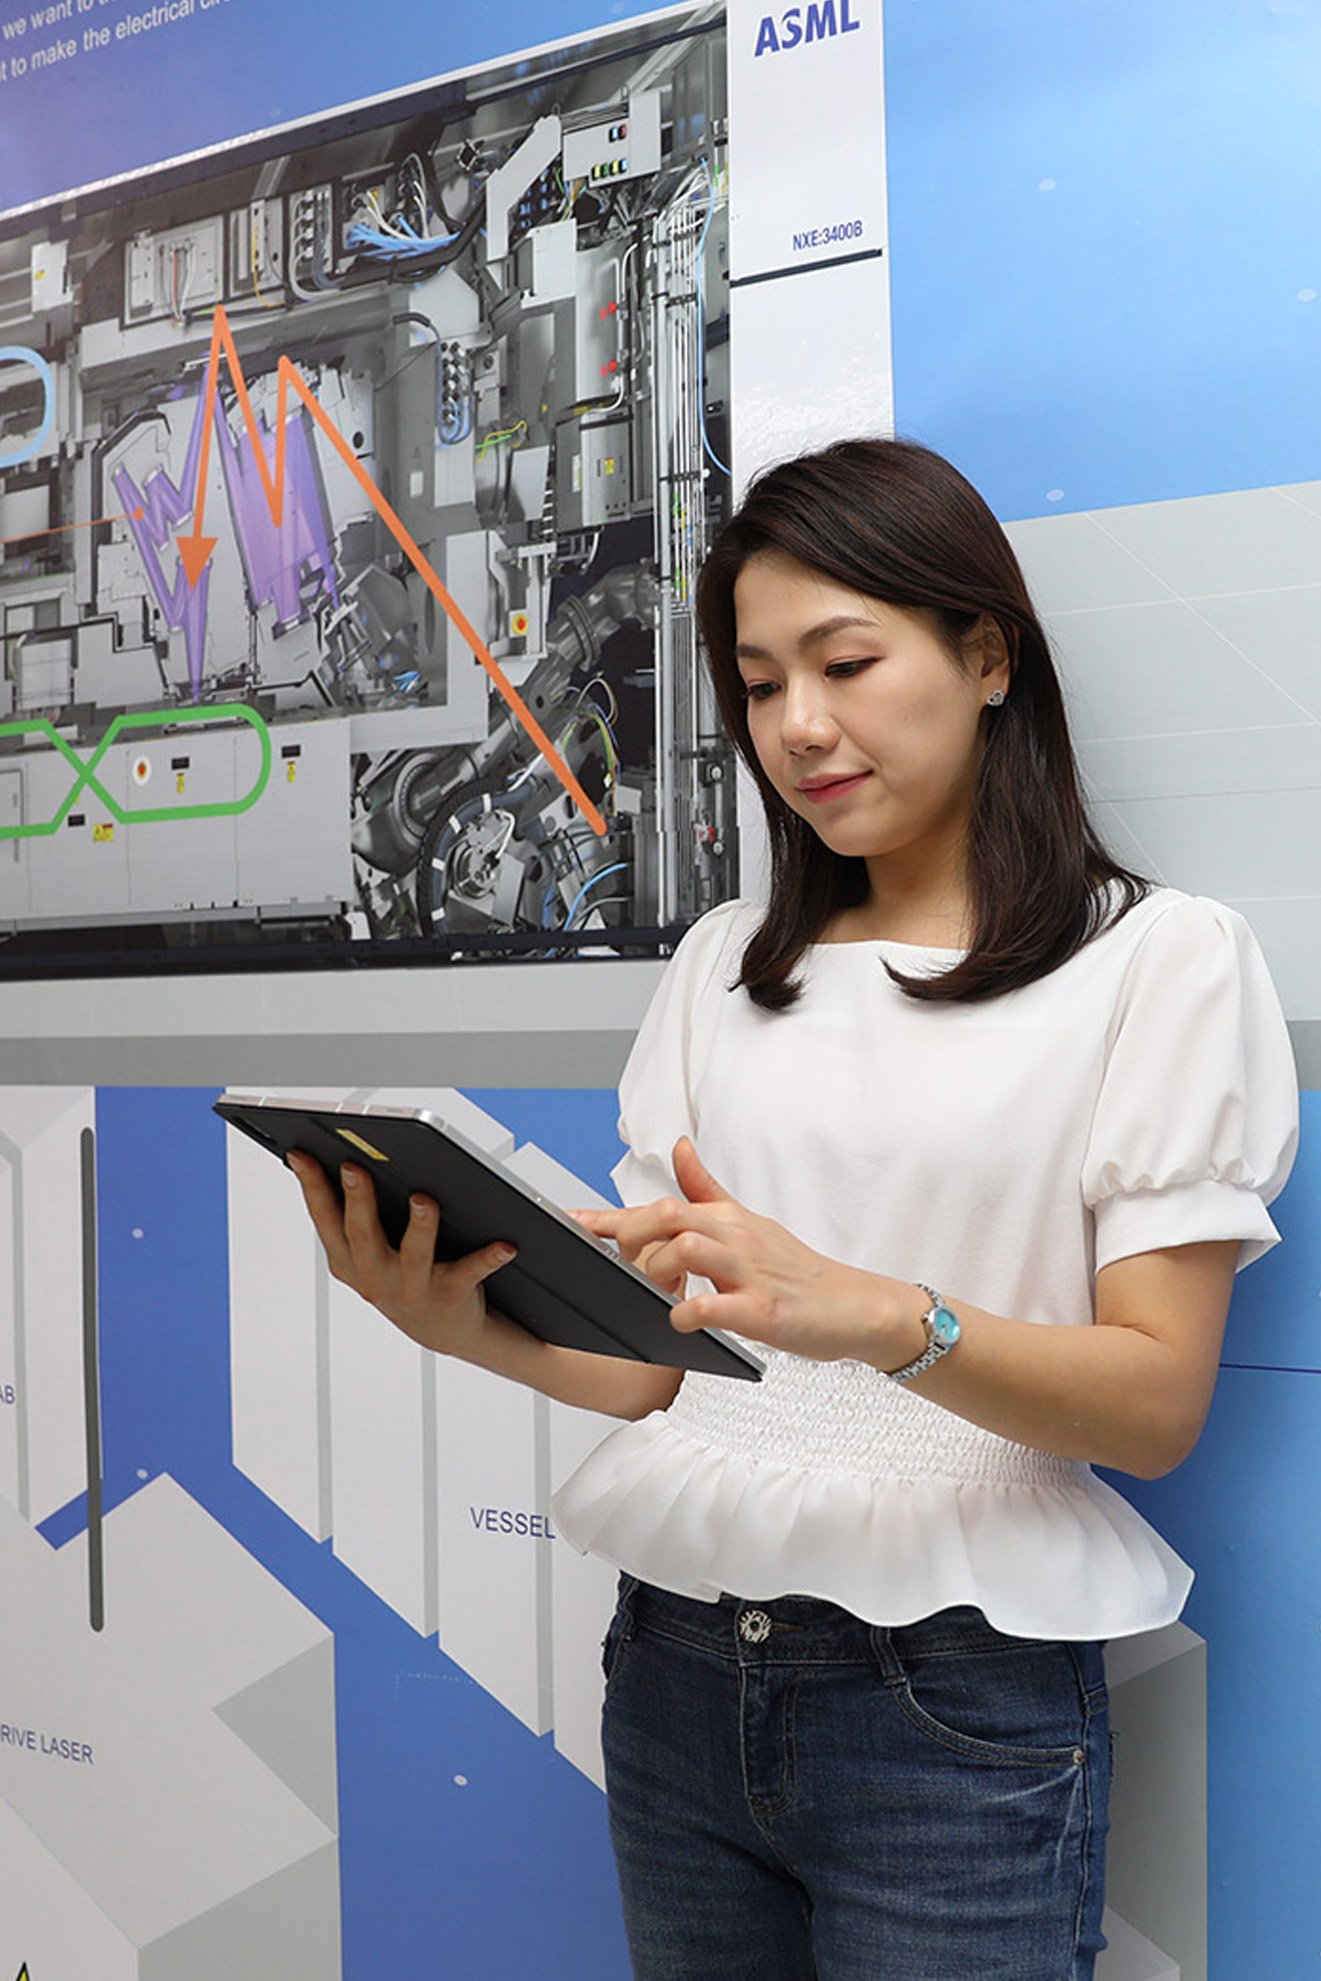 ASML employee in South Korea looks at her tablet